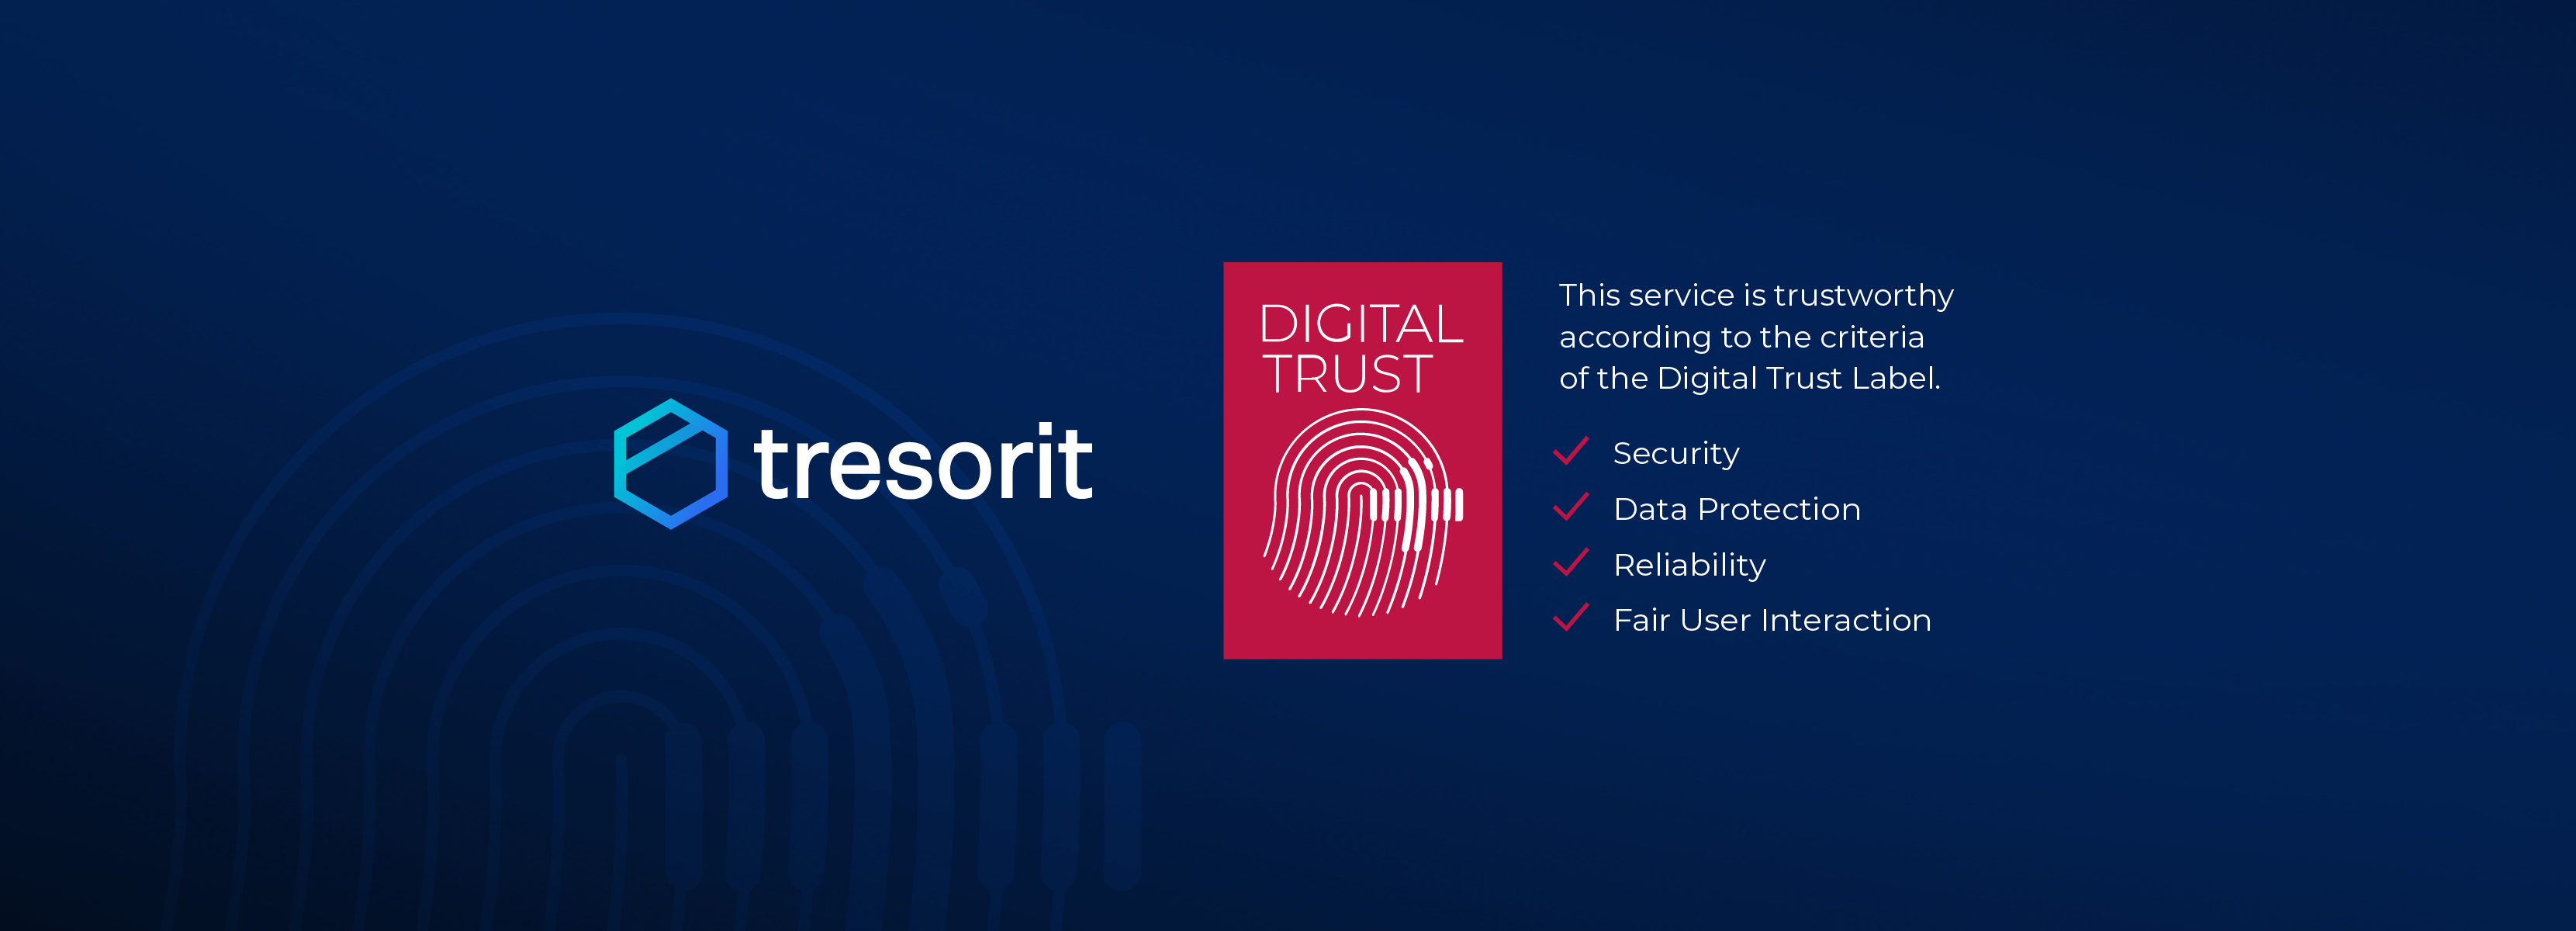 Why Tresorit is committing to the Swiss Digital Trust Label